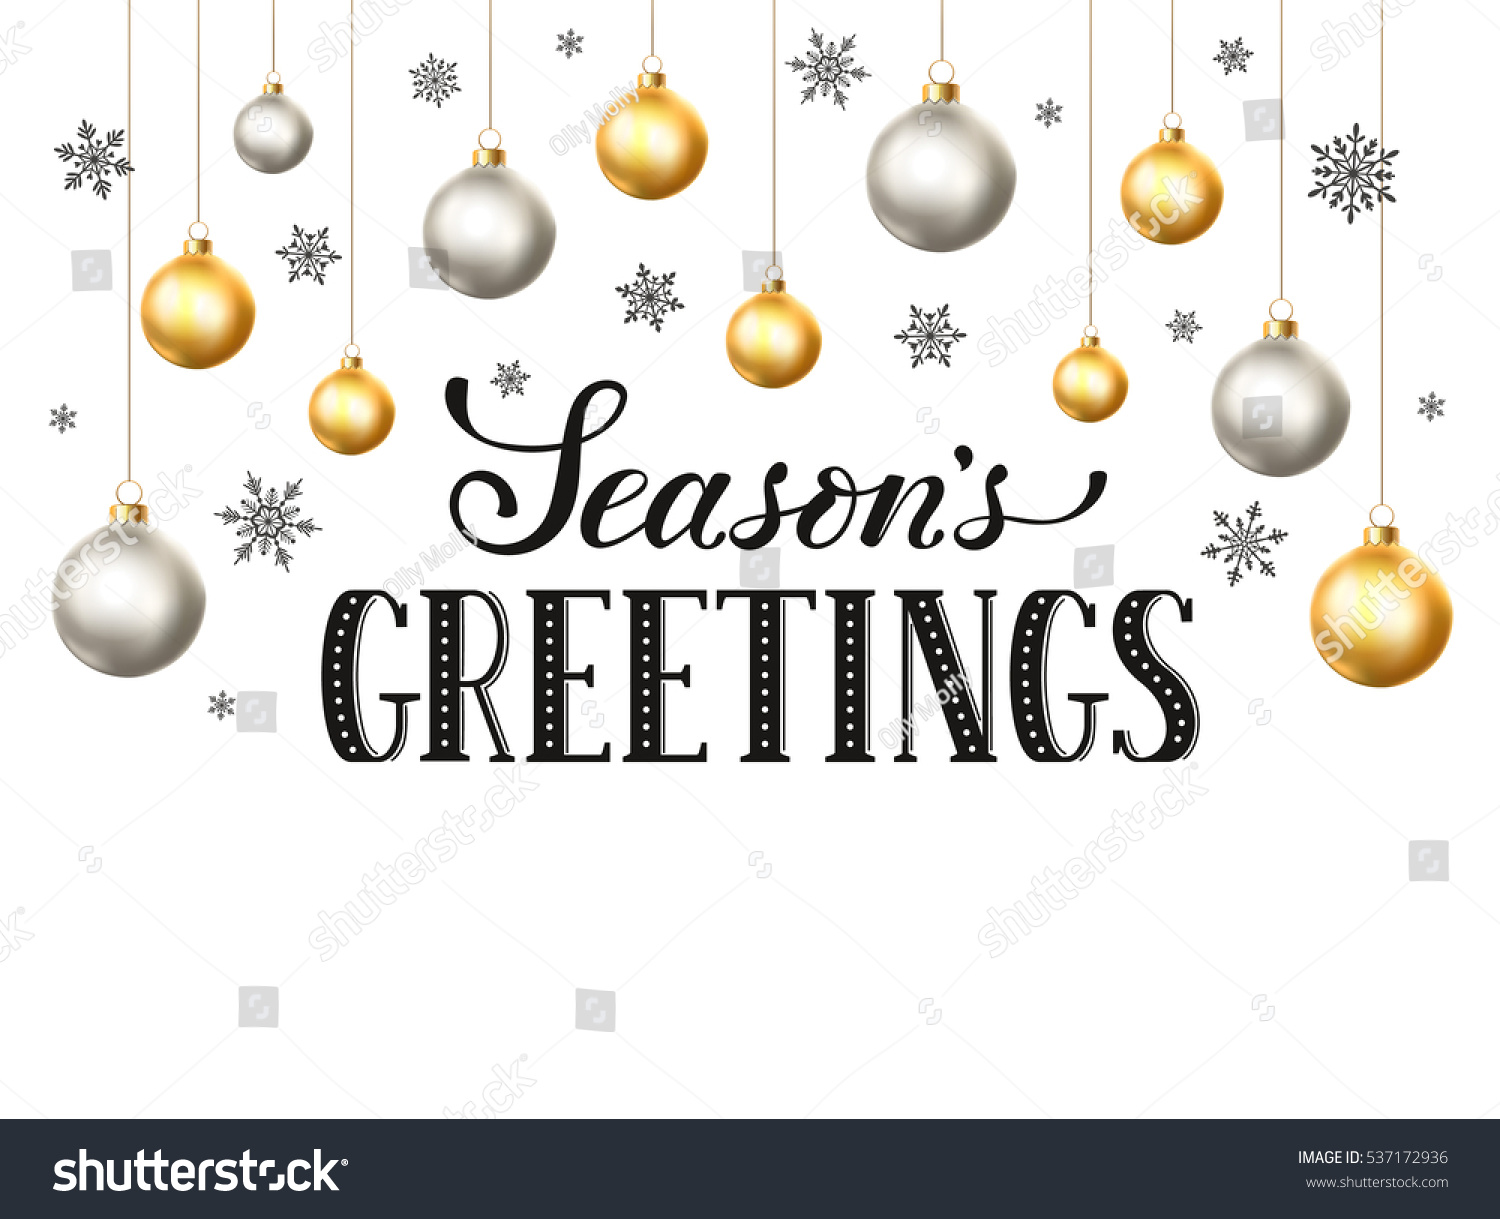 Happy Holidays Card Template from image.shutterstock.com